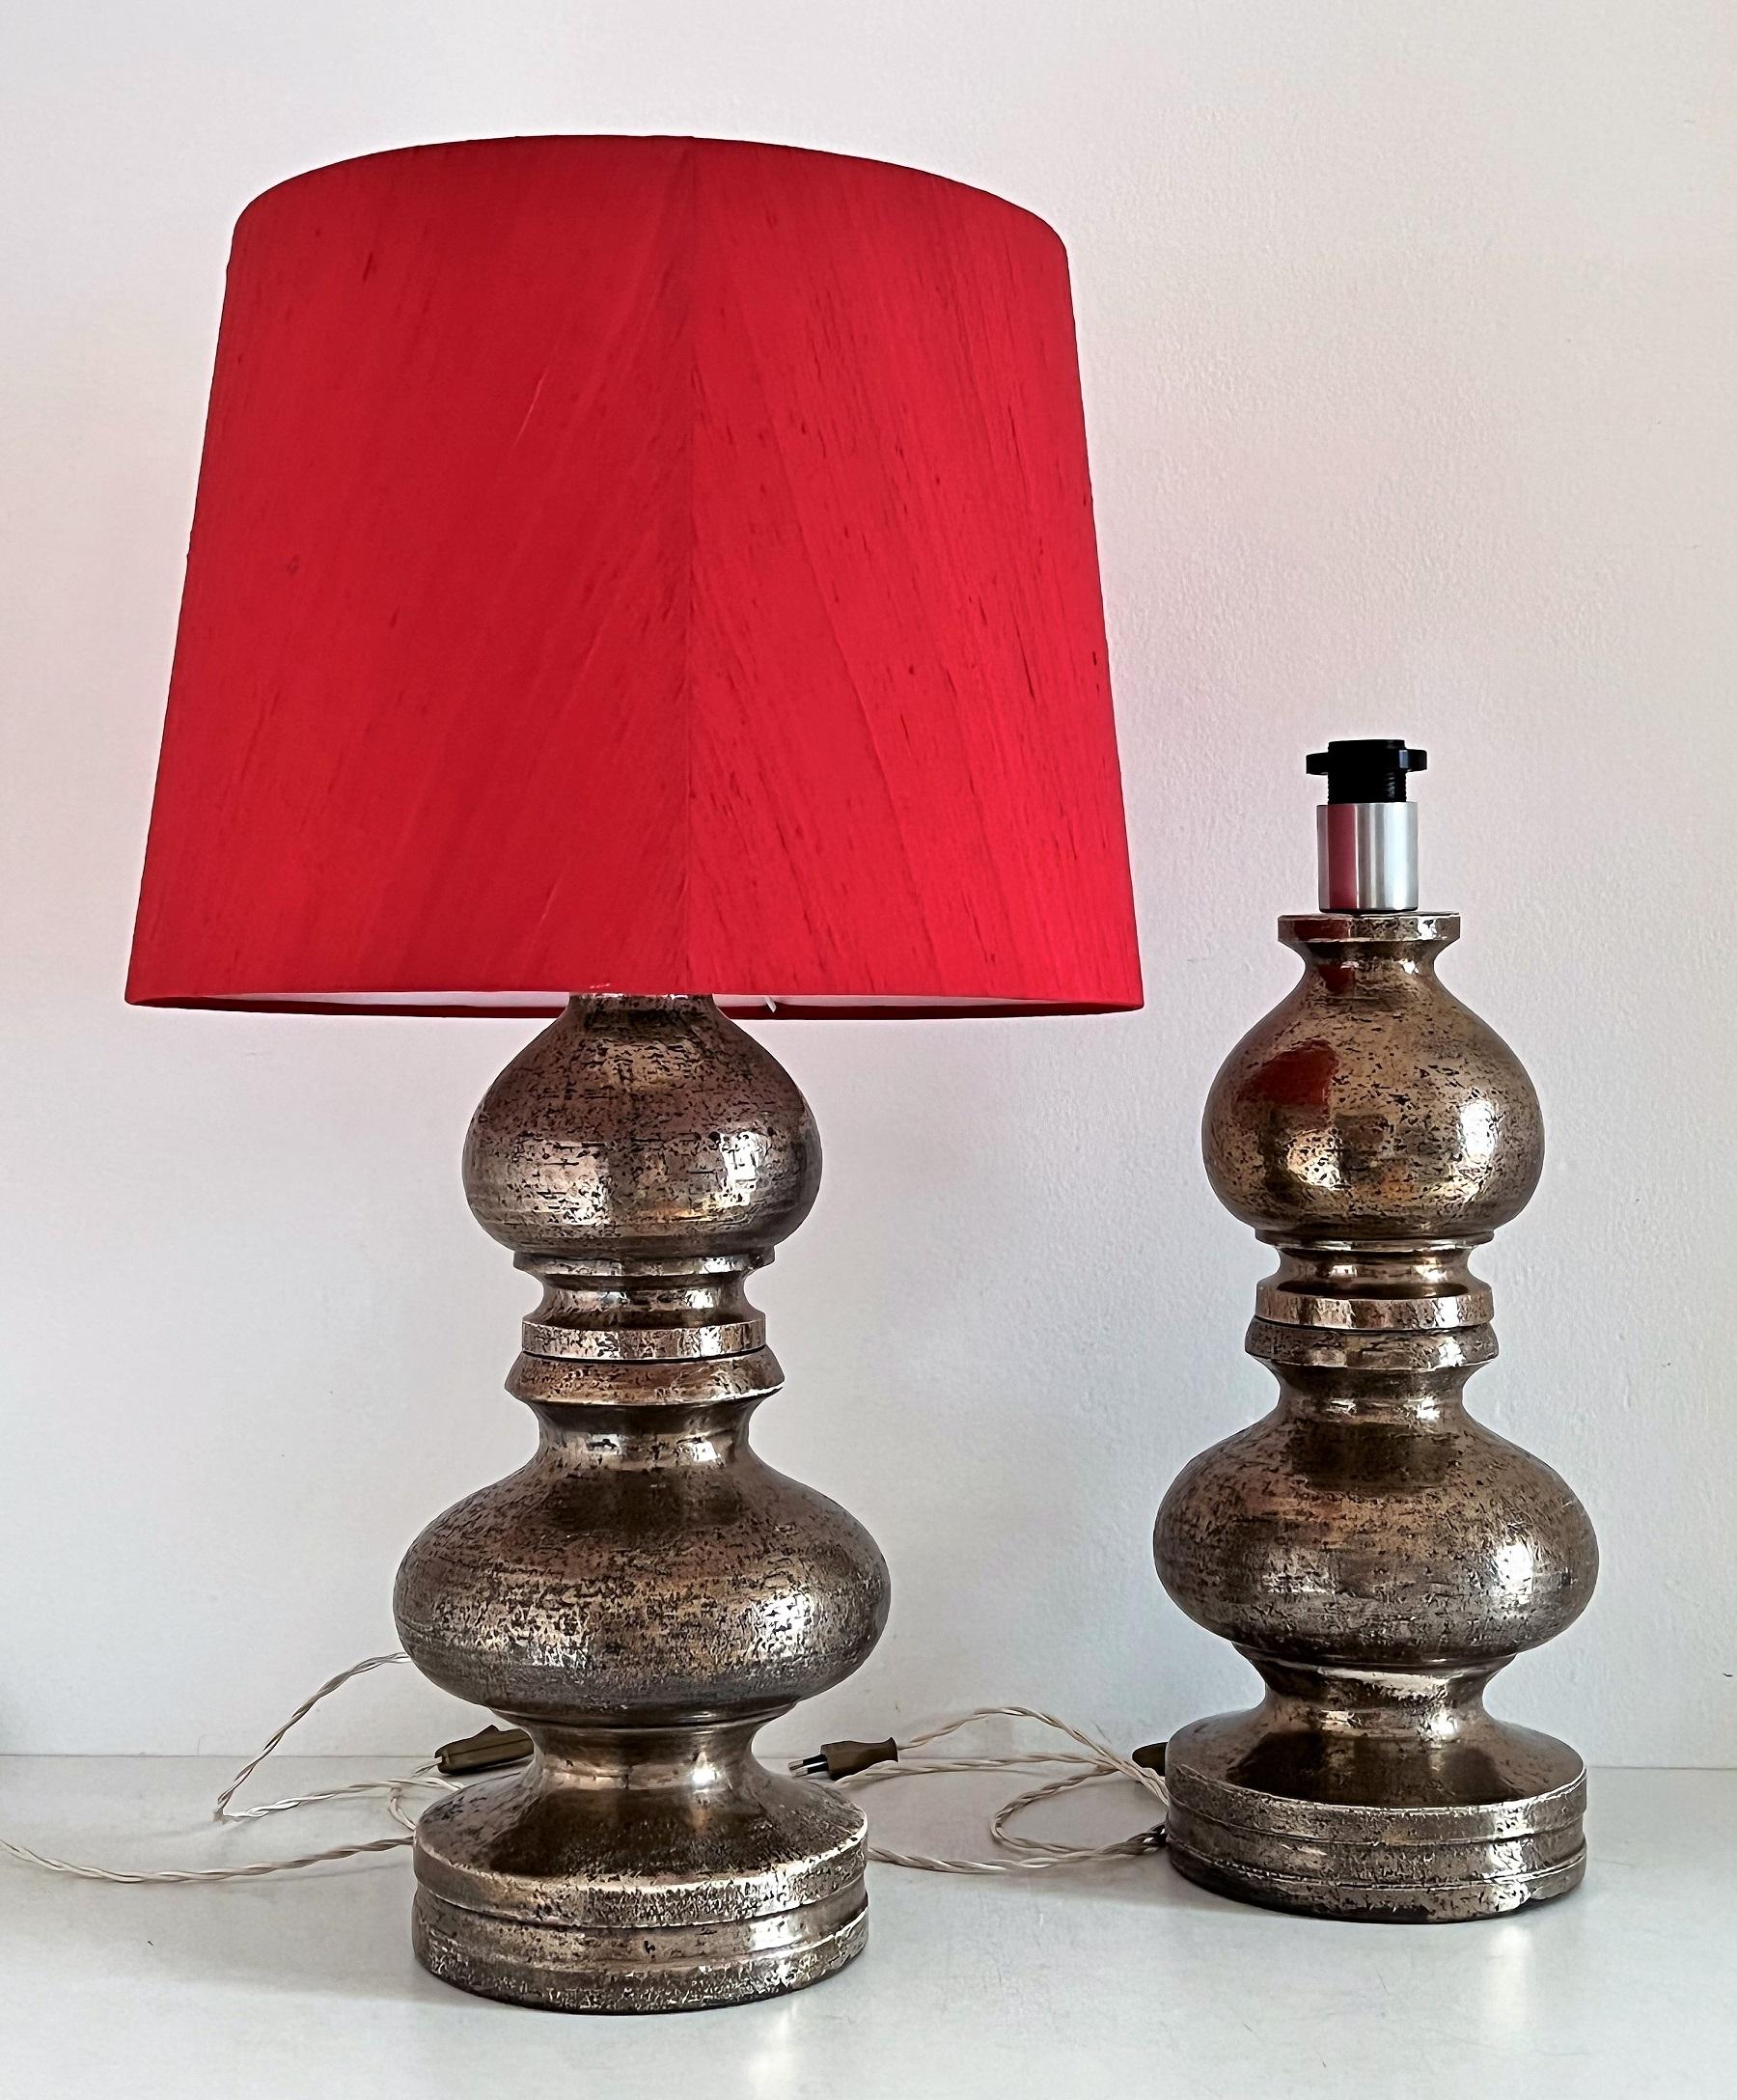 Italian Mid-Century Large Pottery Table Lamps by Aldo Londi for Bitossi, 1960s For Sale 2